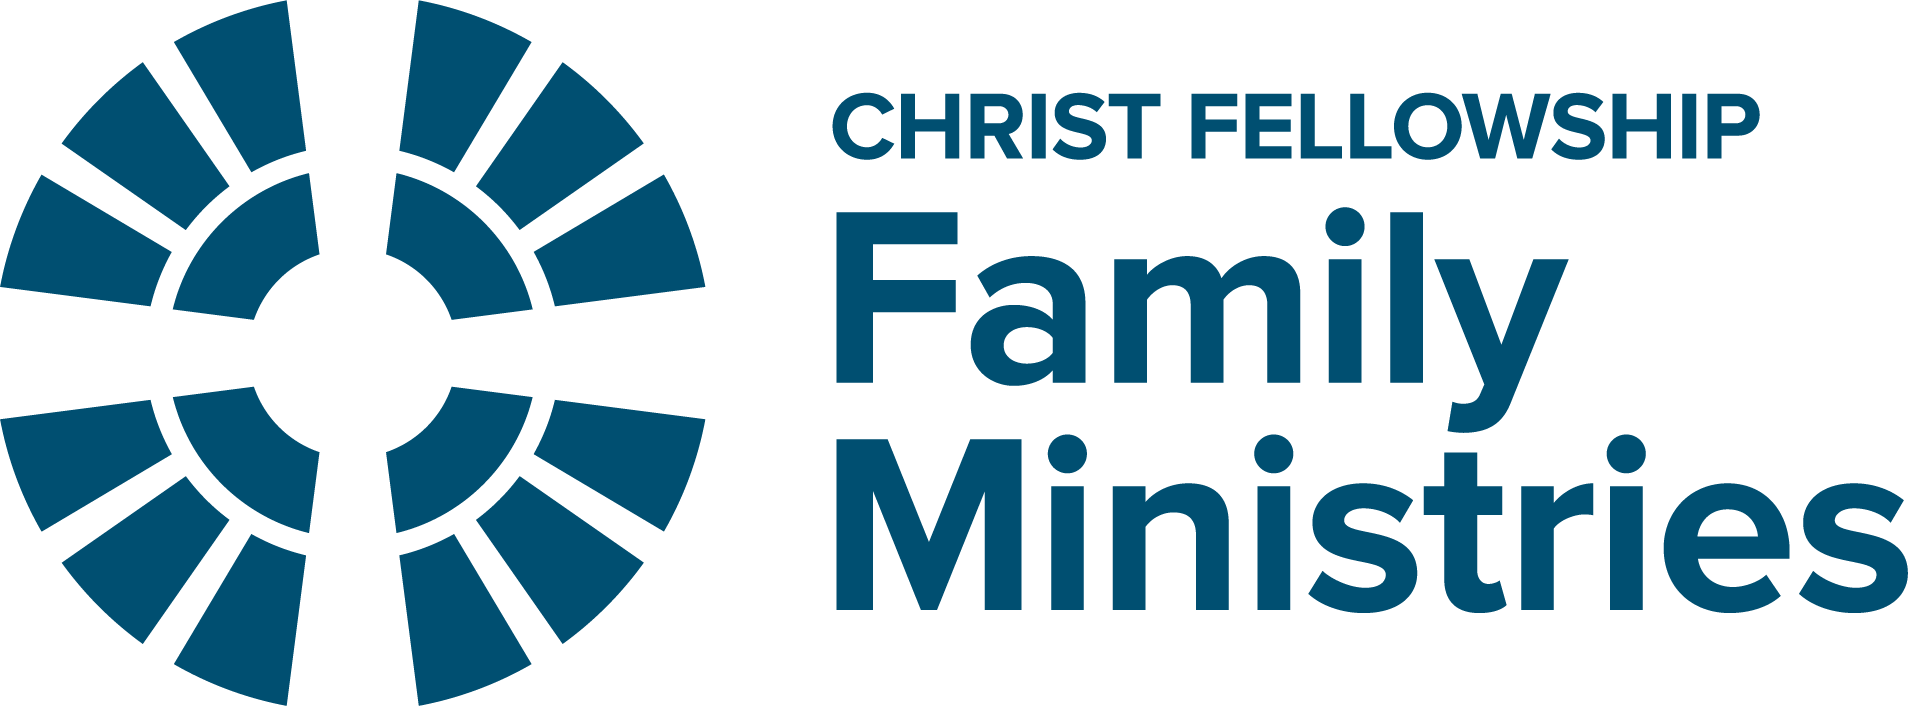 CF_FamilyMinistry.png